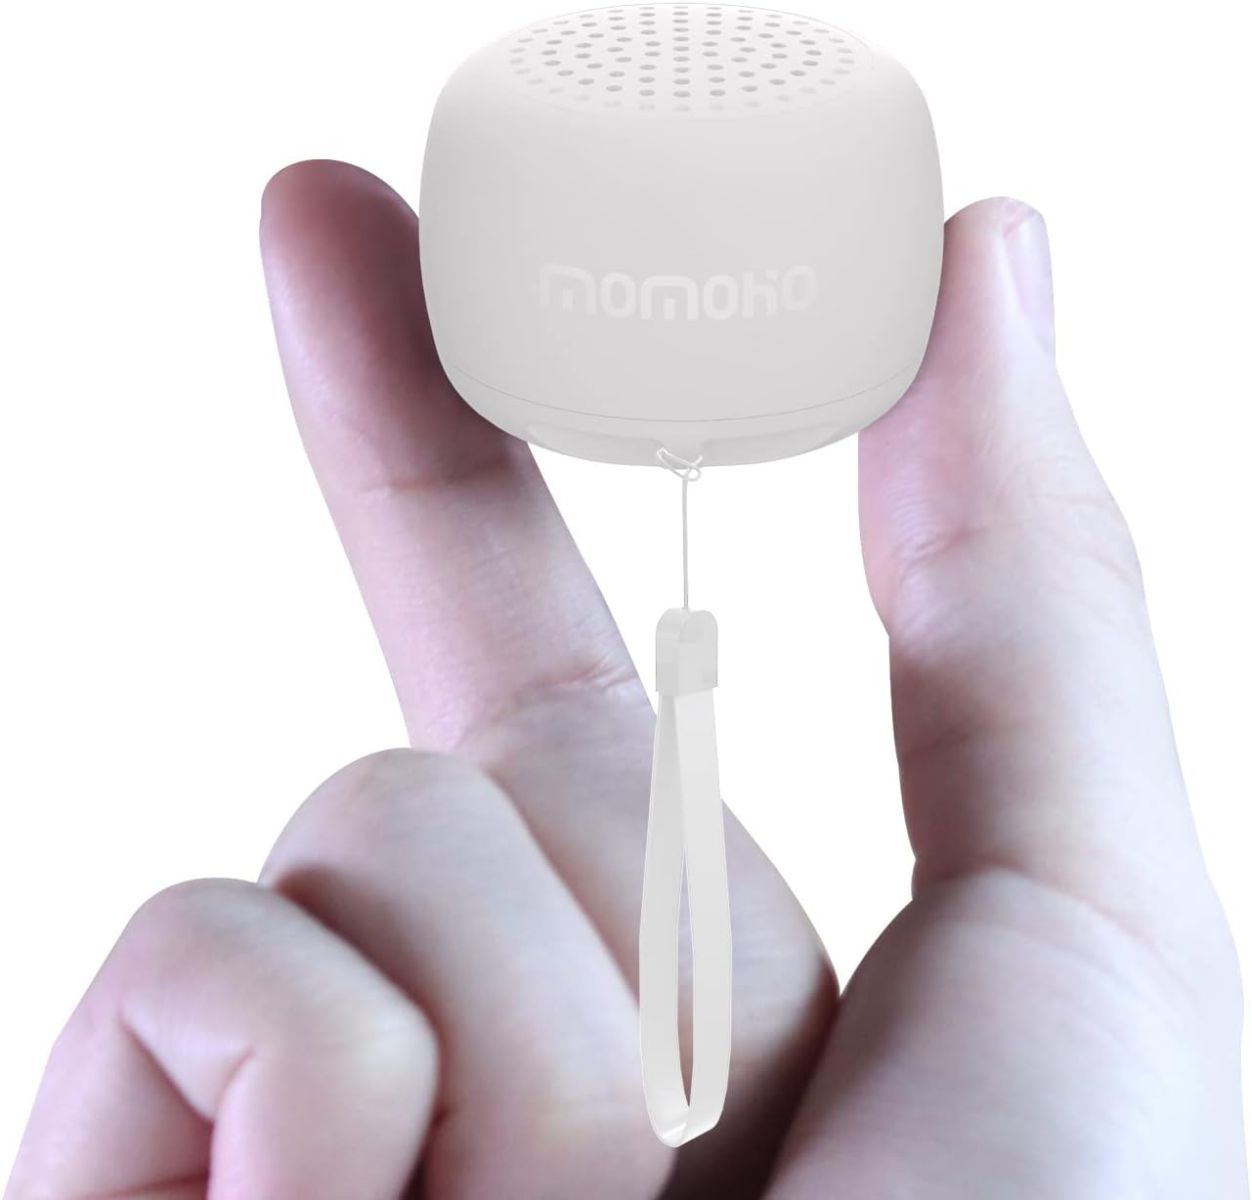 MOMOHO Mini Bluetooth Speaker - Small Size but Great Sound Quality,with Built in Mic,TWS Pairing Portable Speaker for Home/Outdoor/Travel, Smartphone, Laptop (White)